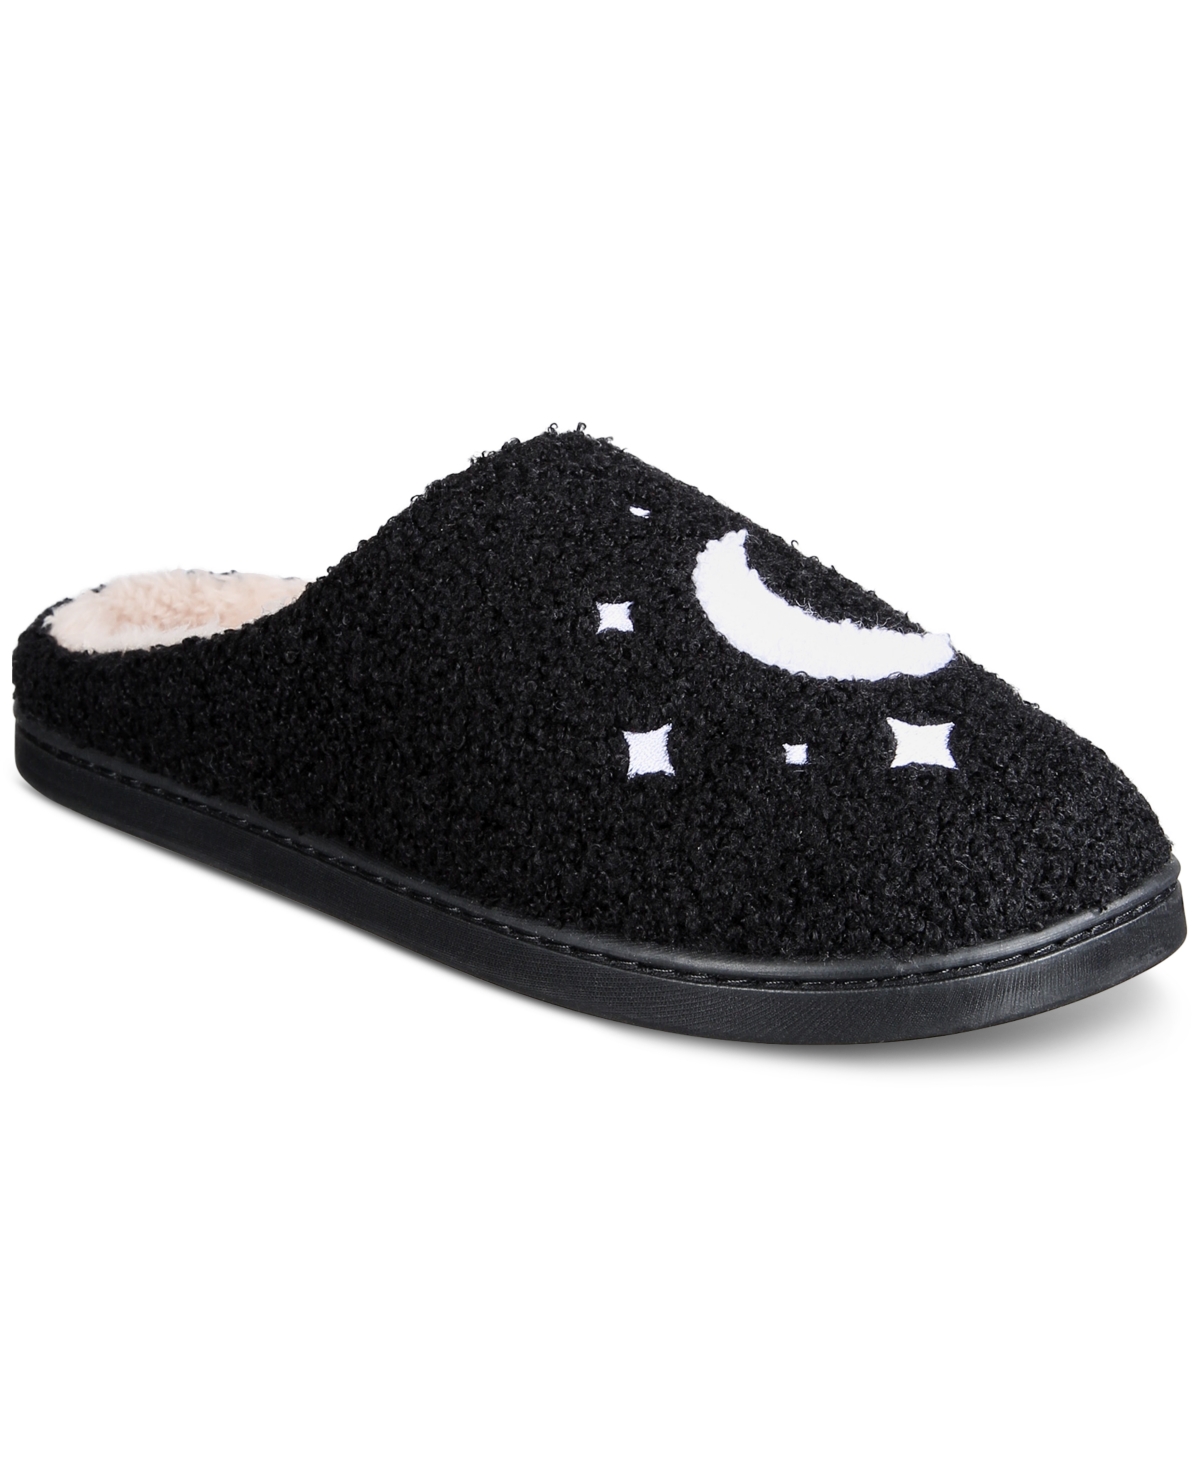 Women's Boxed Slippers, Created for Macy's - Twinkle Star